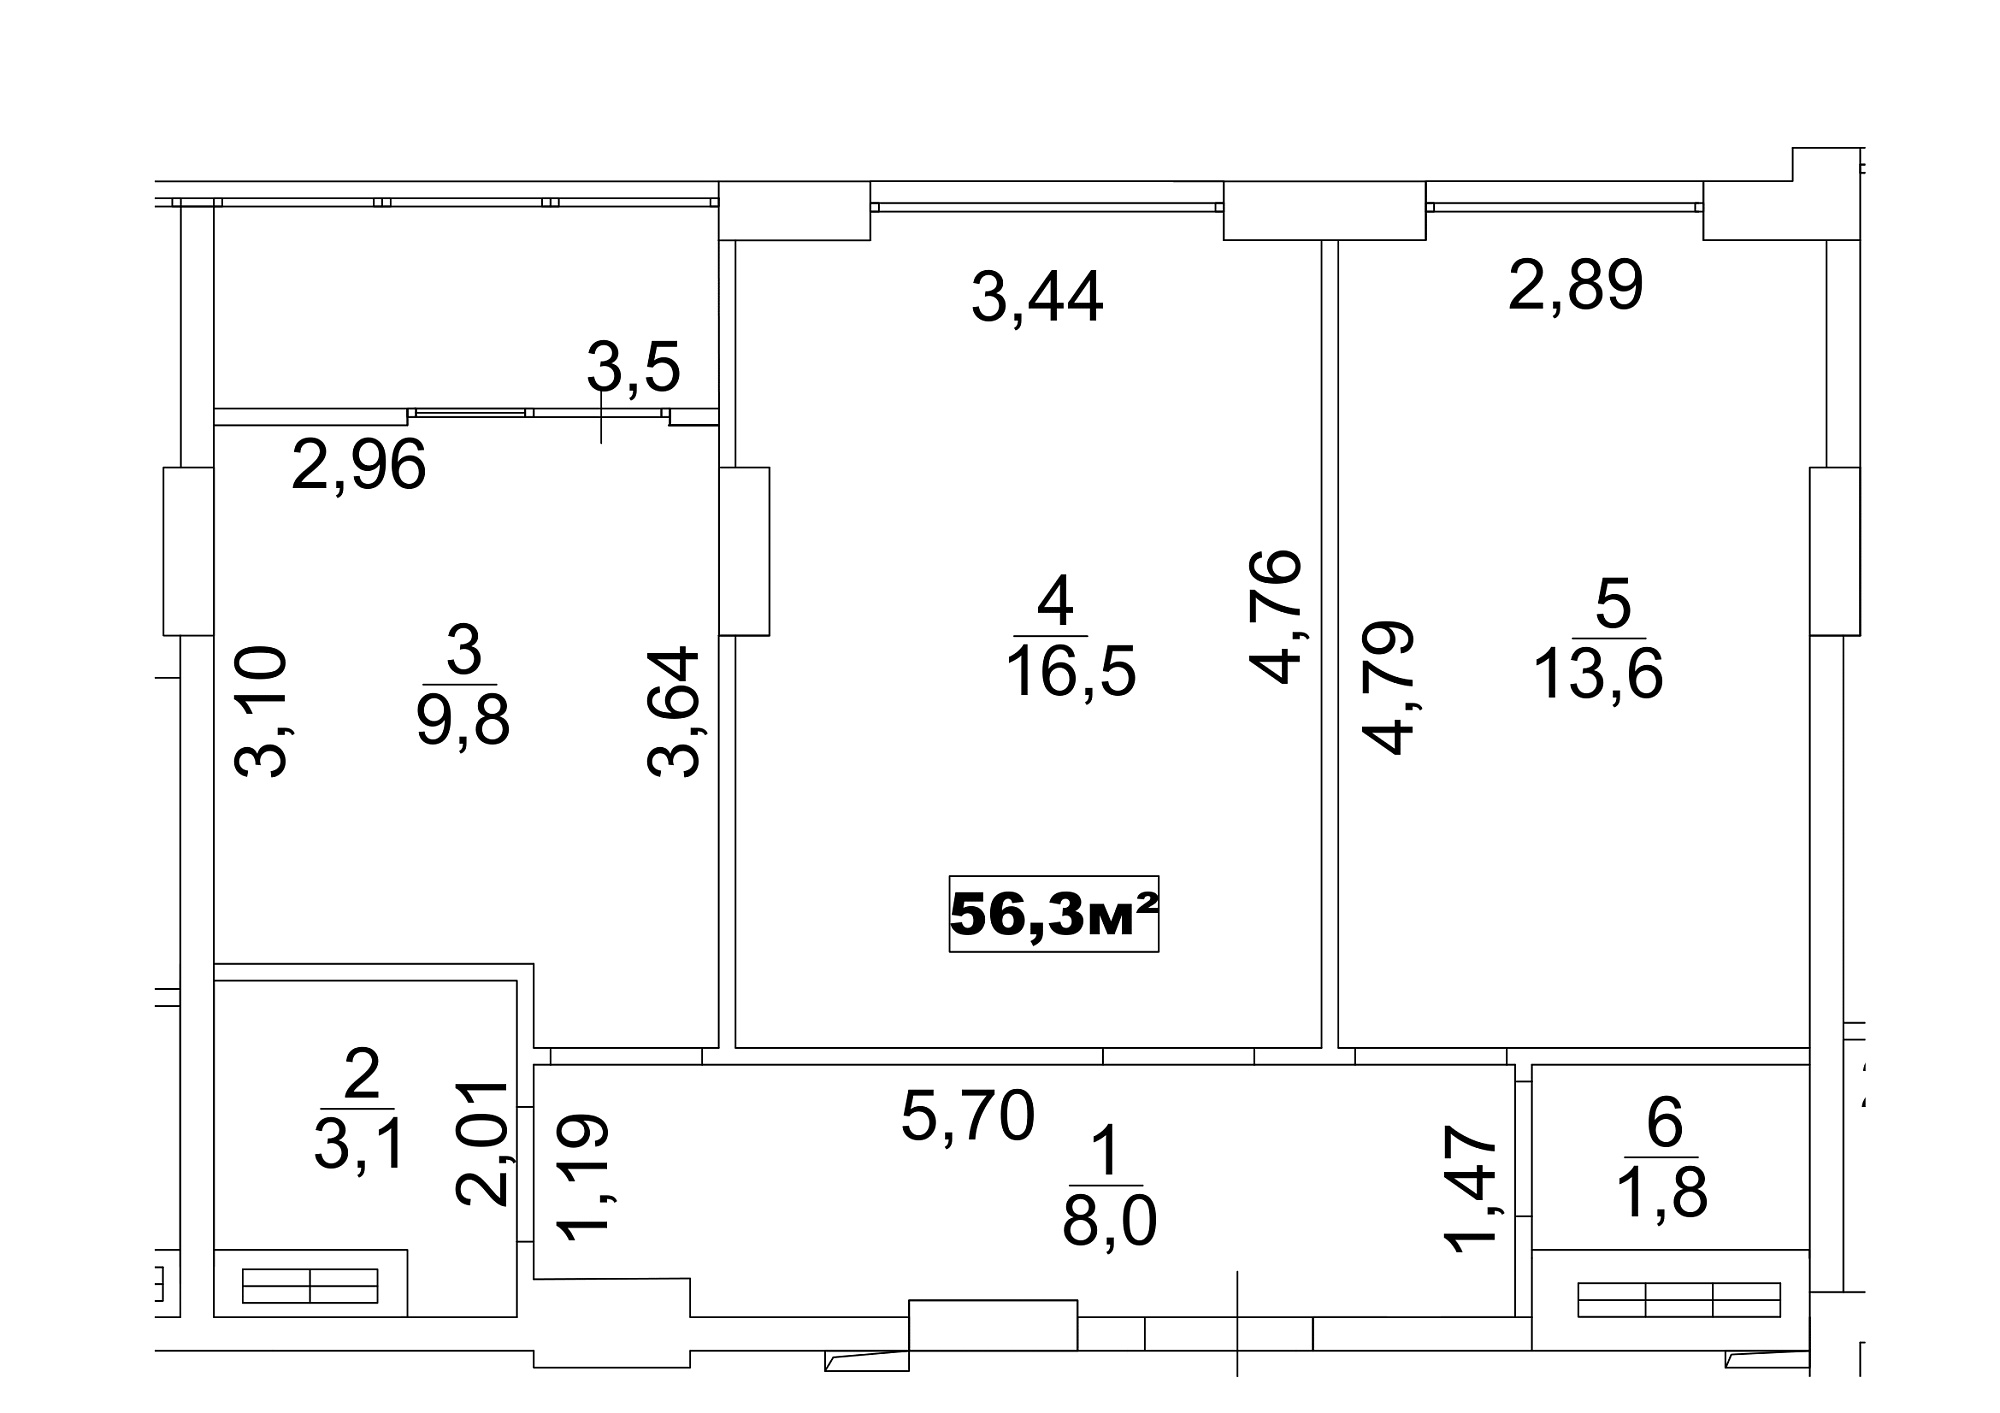 Planning 2-rm flats area 56.3m2, AB-13-05/00037.